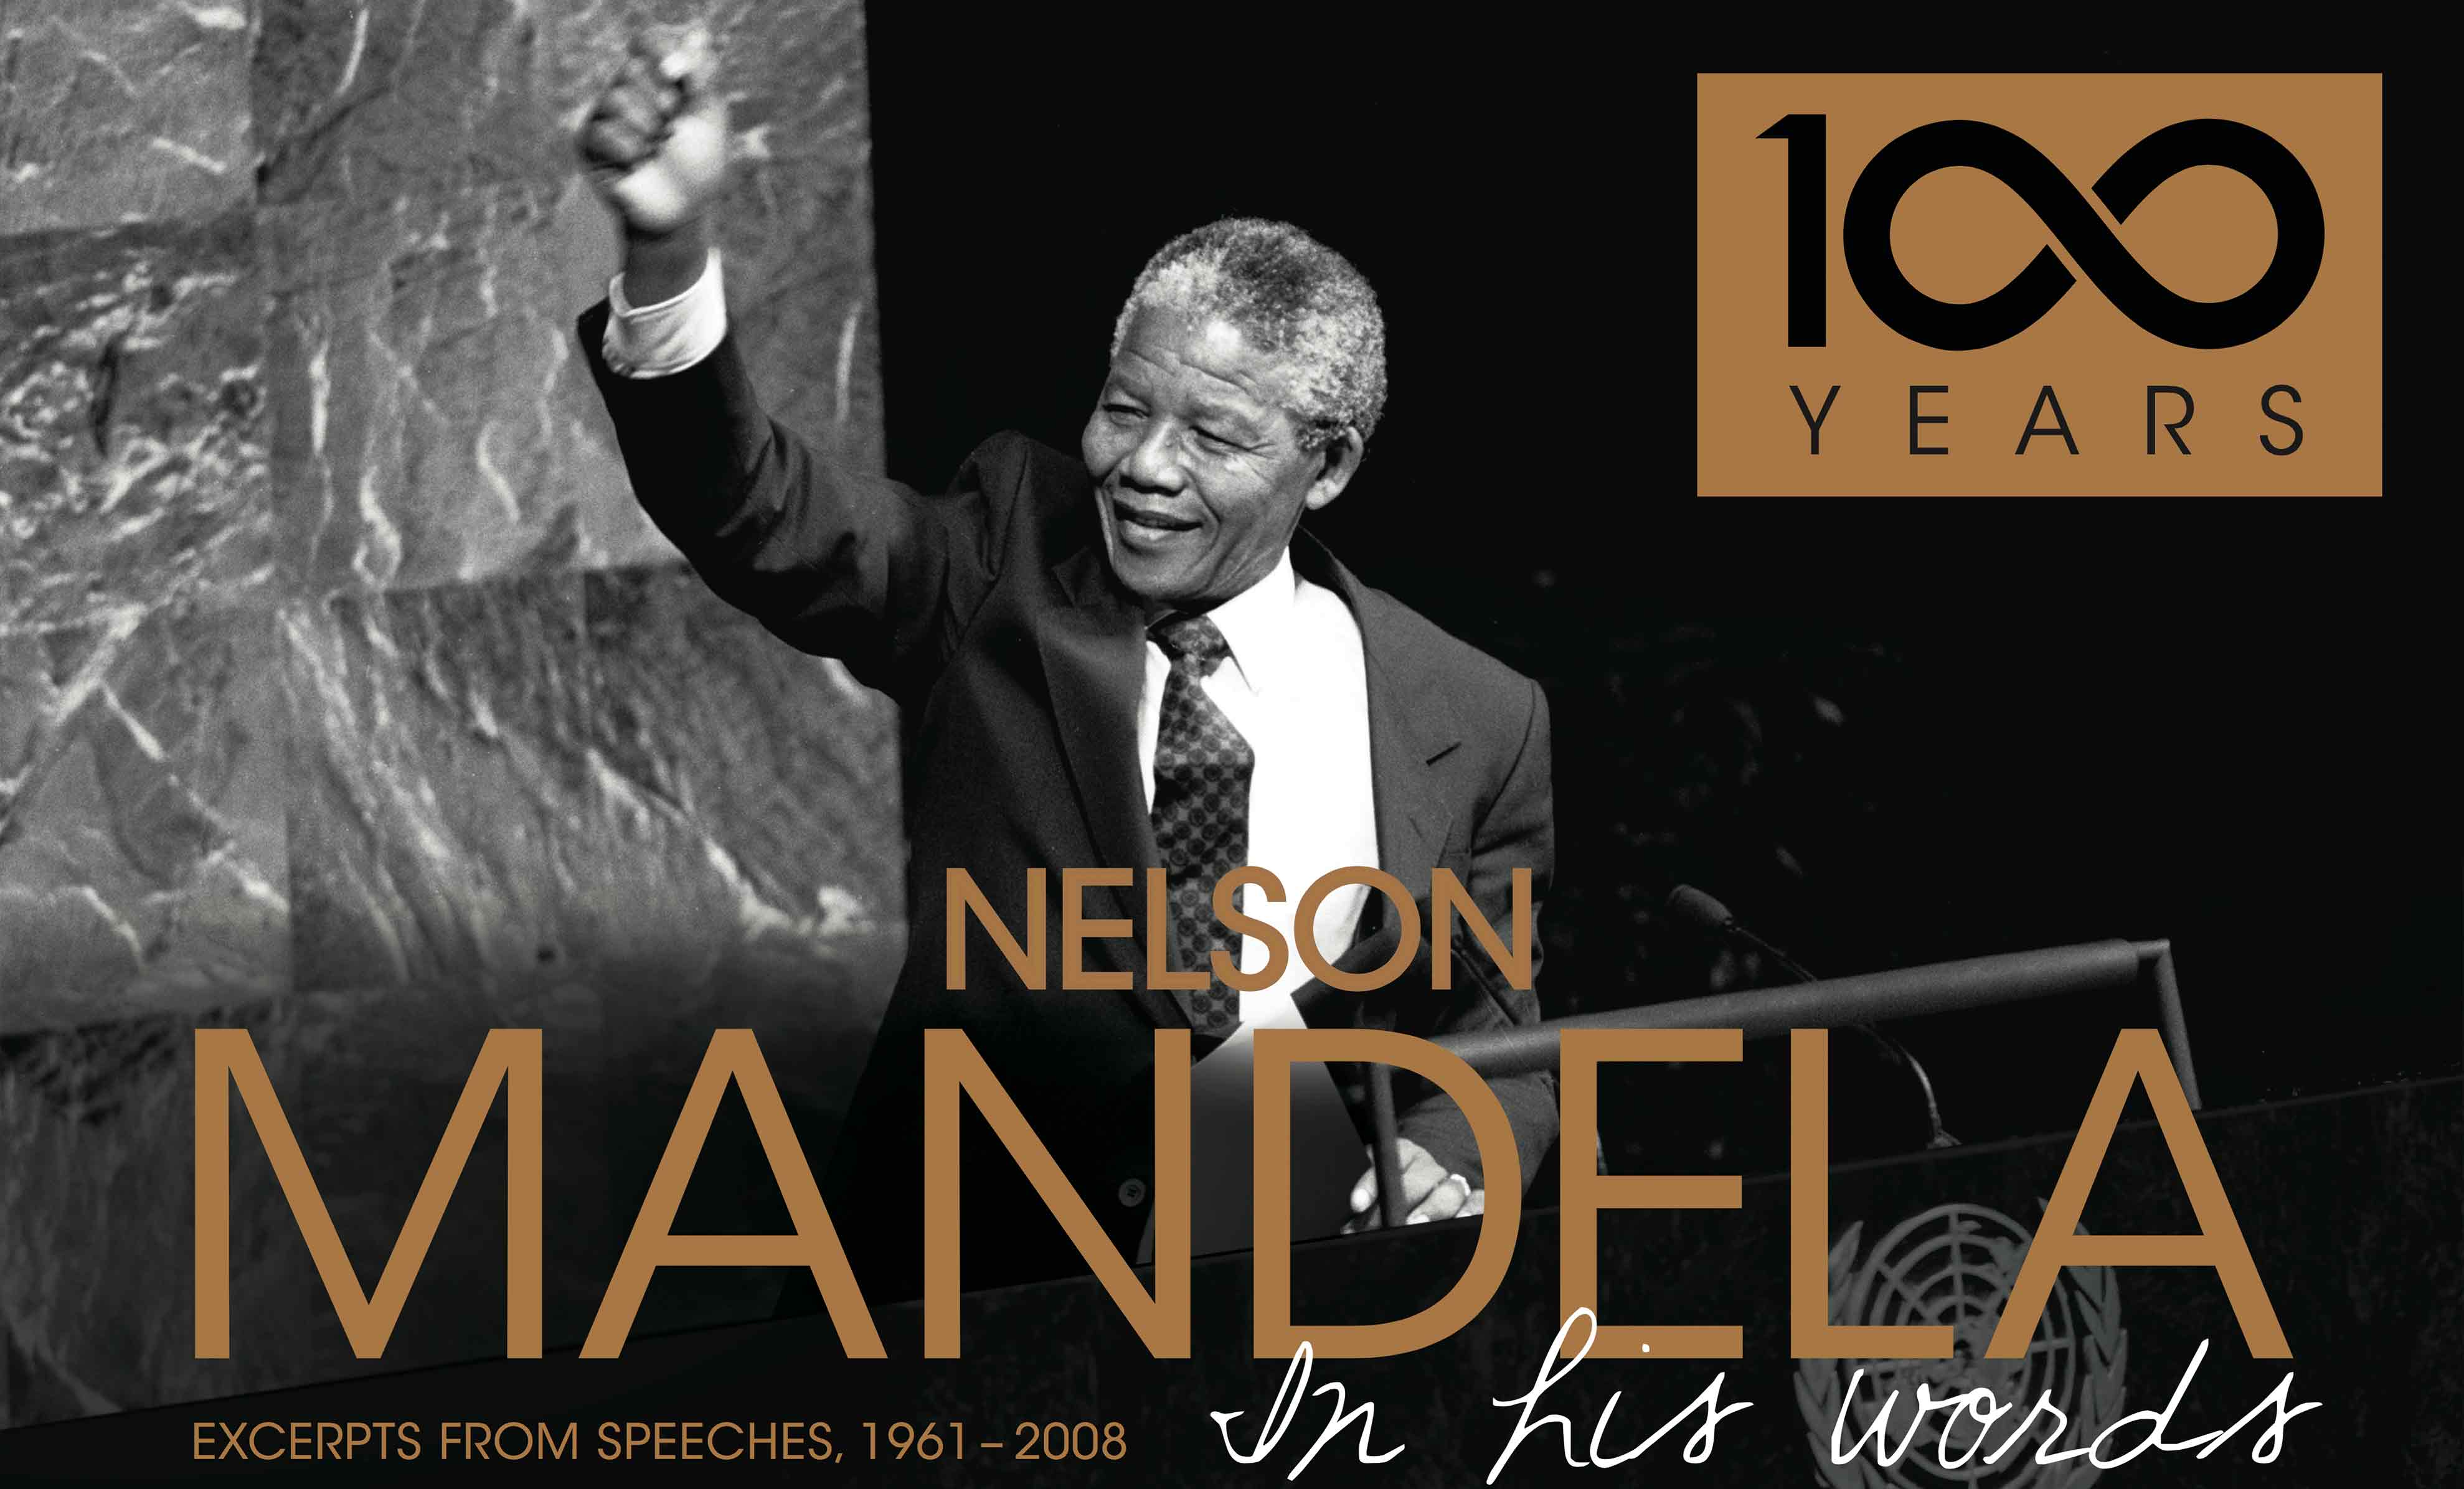 Booklet cover imnage: Nelson Mandela Excerpts from Speeches, 1961 - 2008.